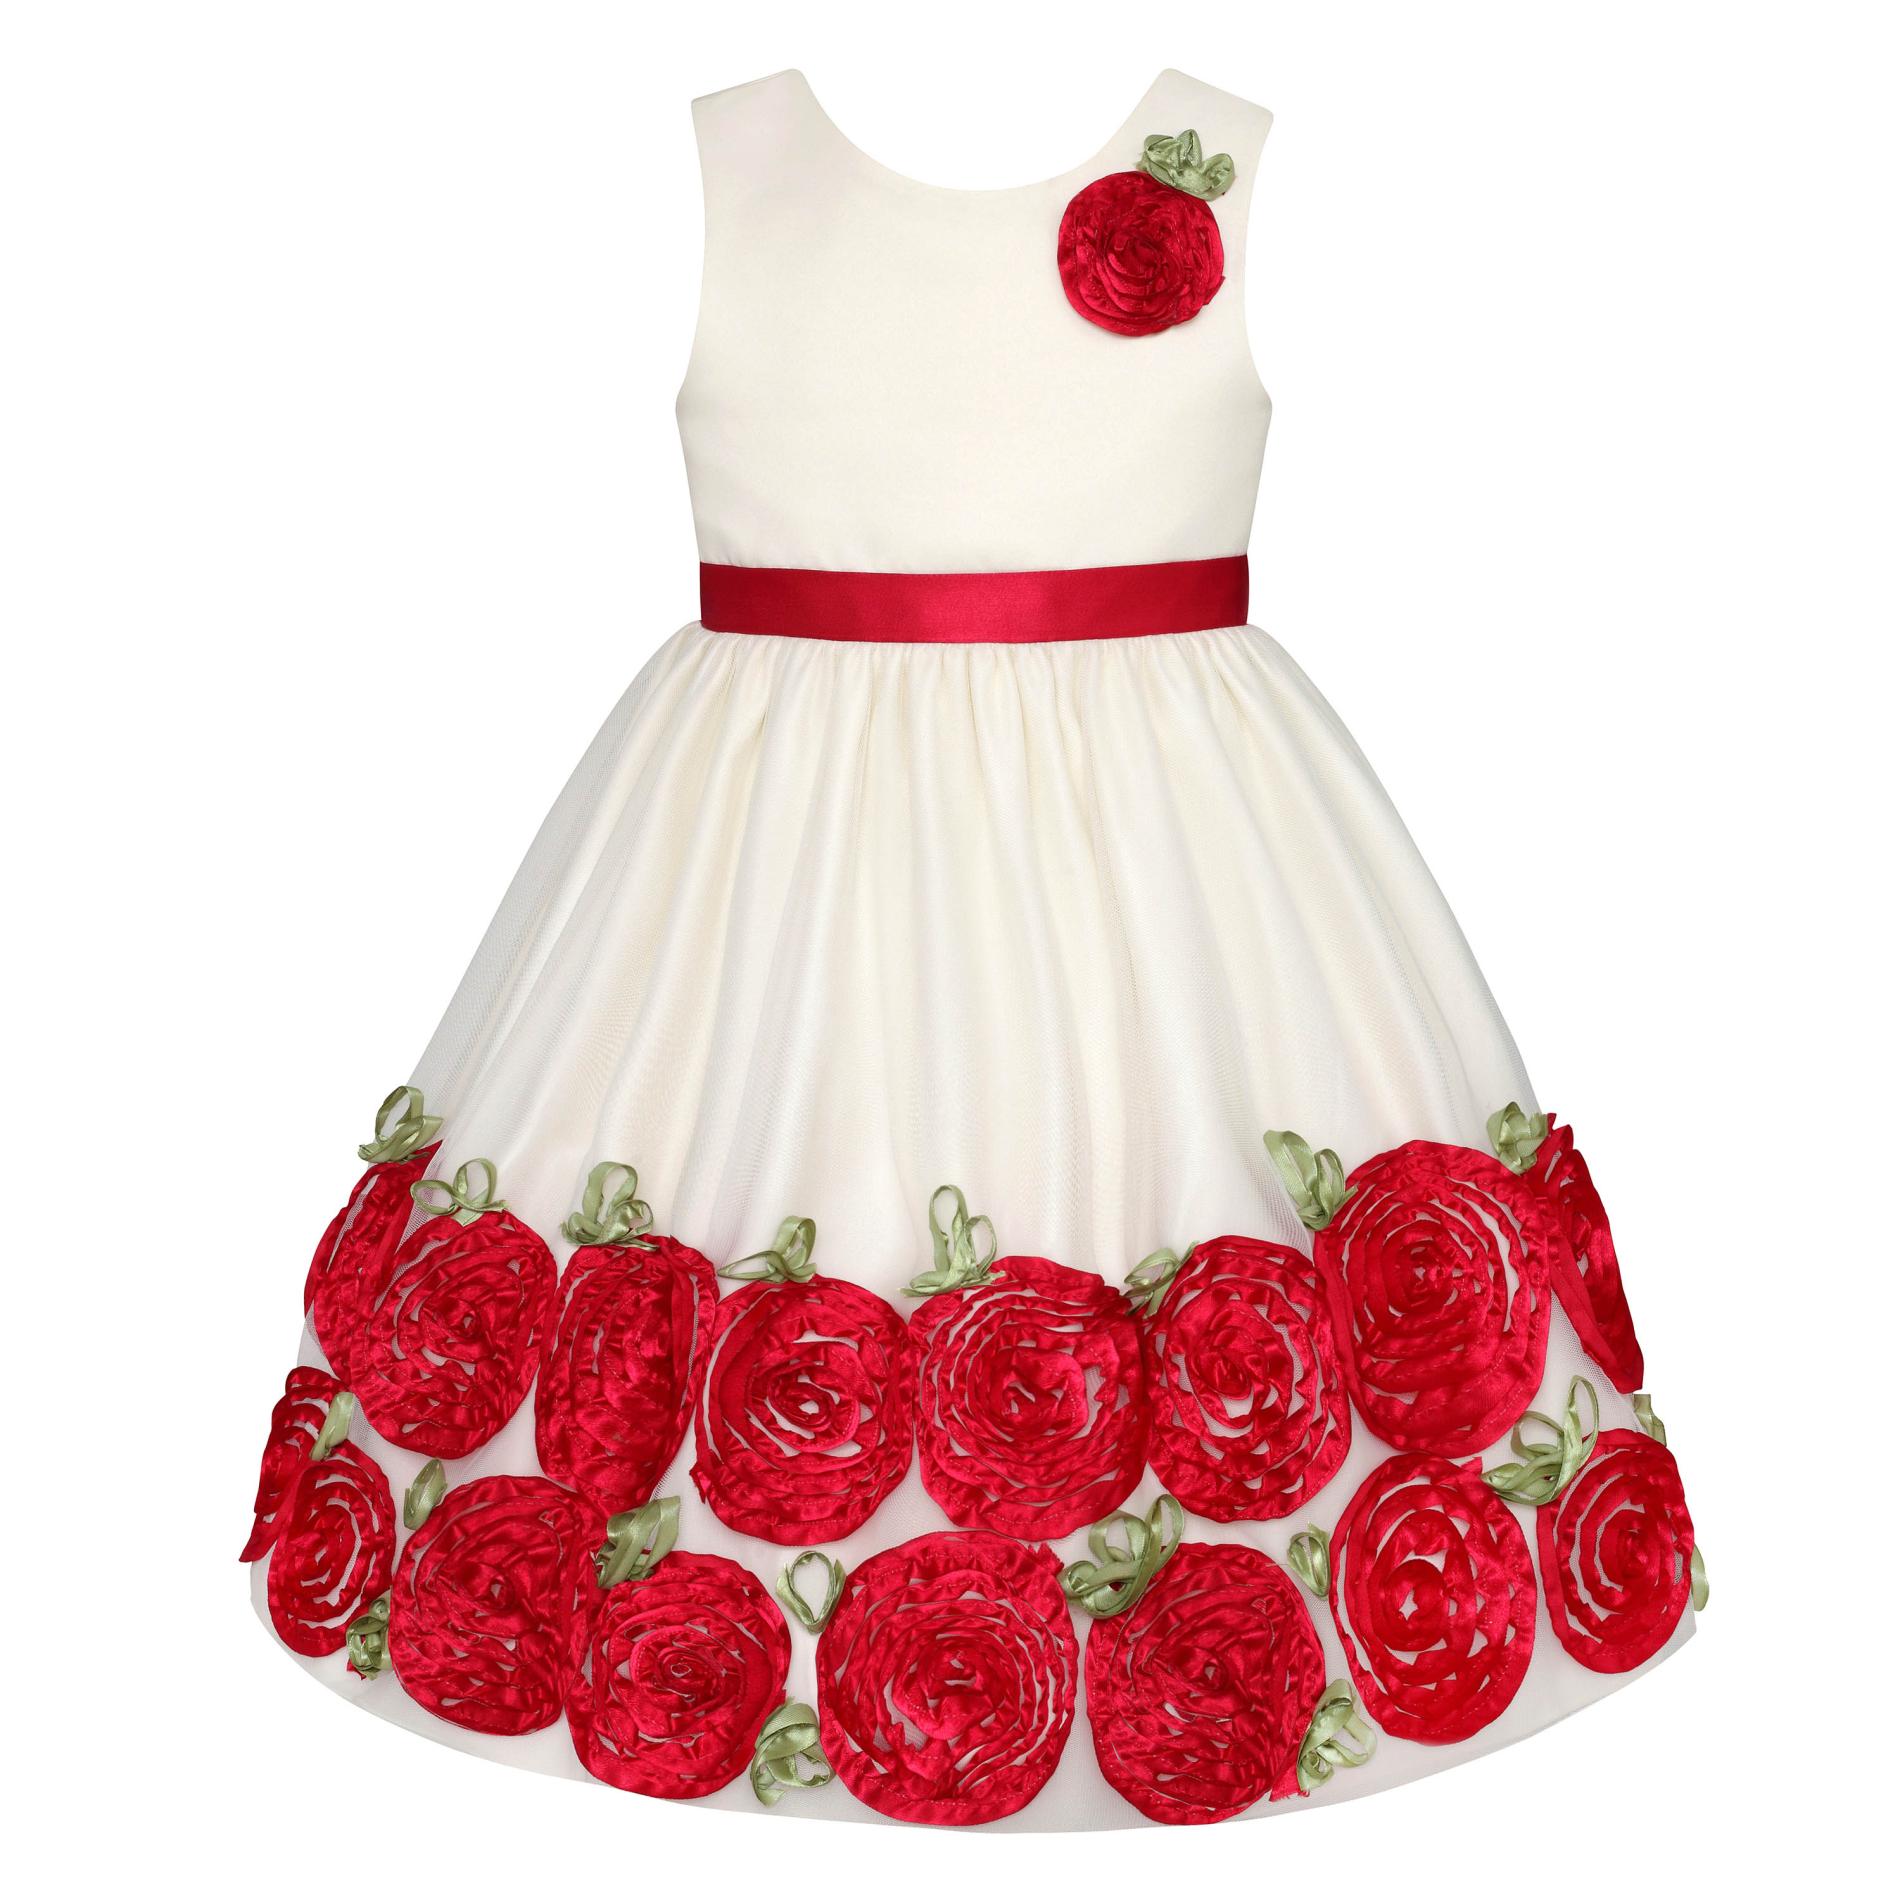 American Princess Girl's Satin Occasion Gown - Floral Soutache